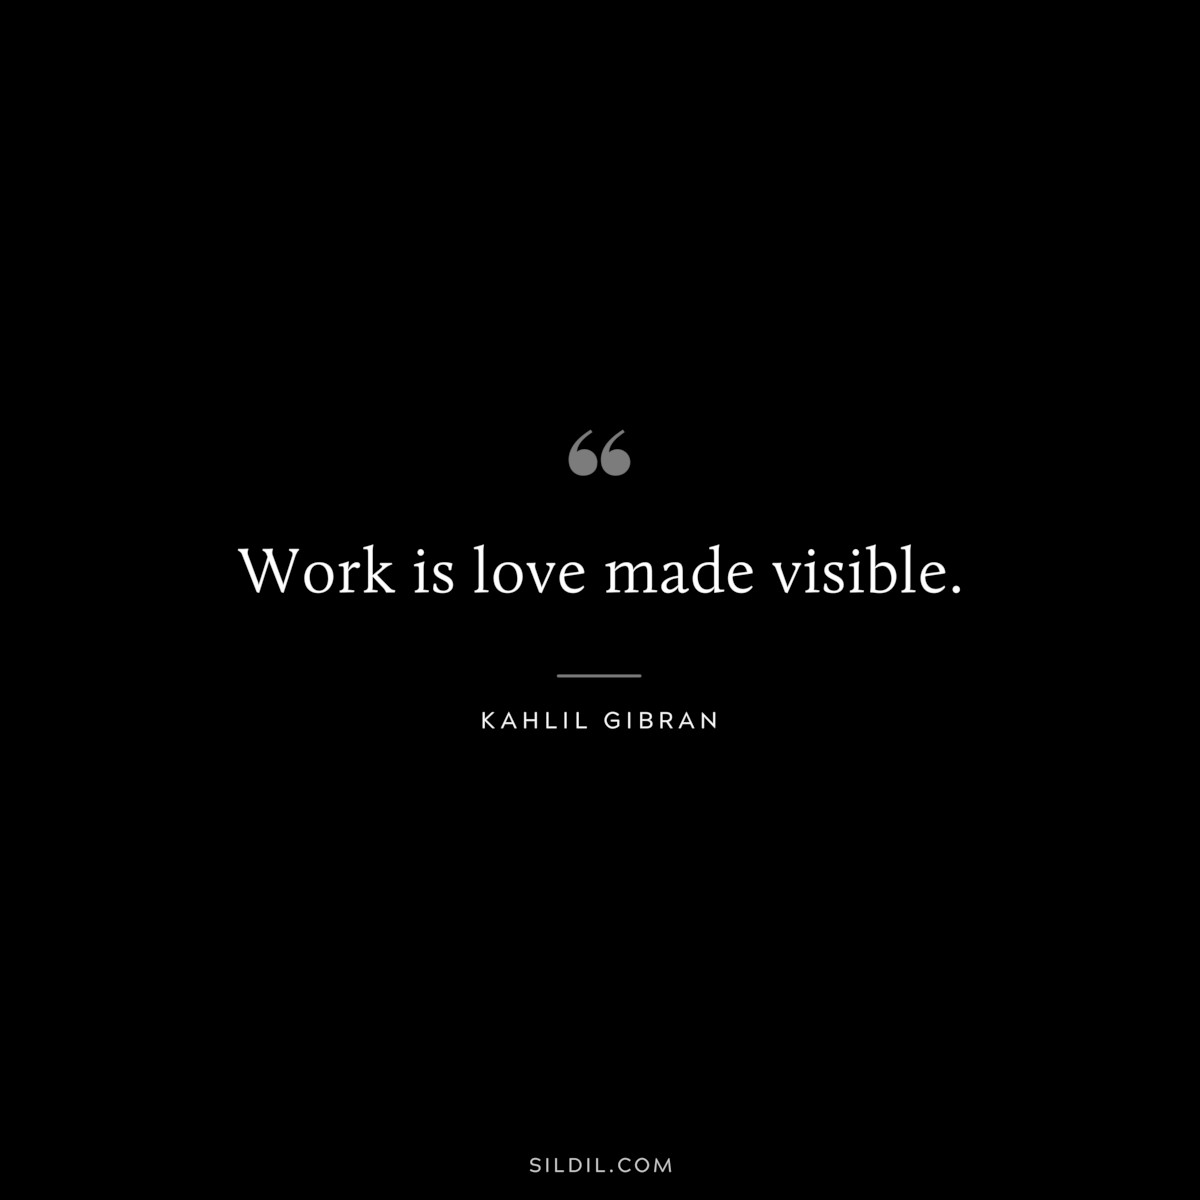 Work is love made visible. ― Kahlil Gibran